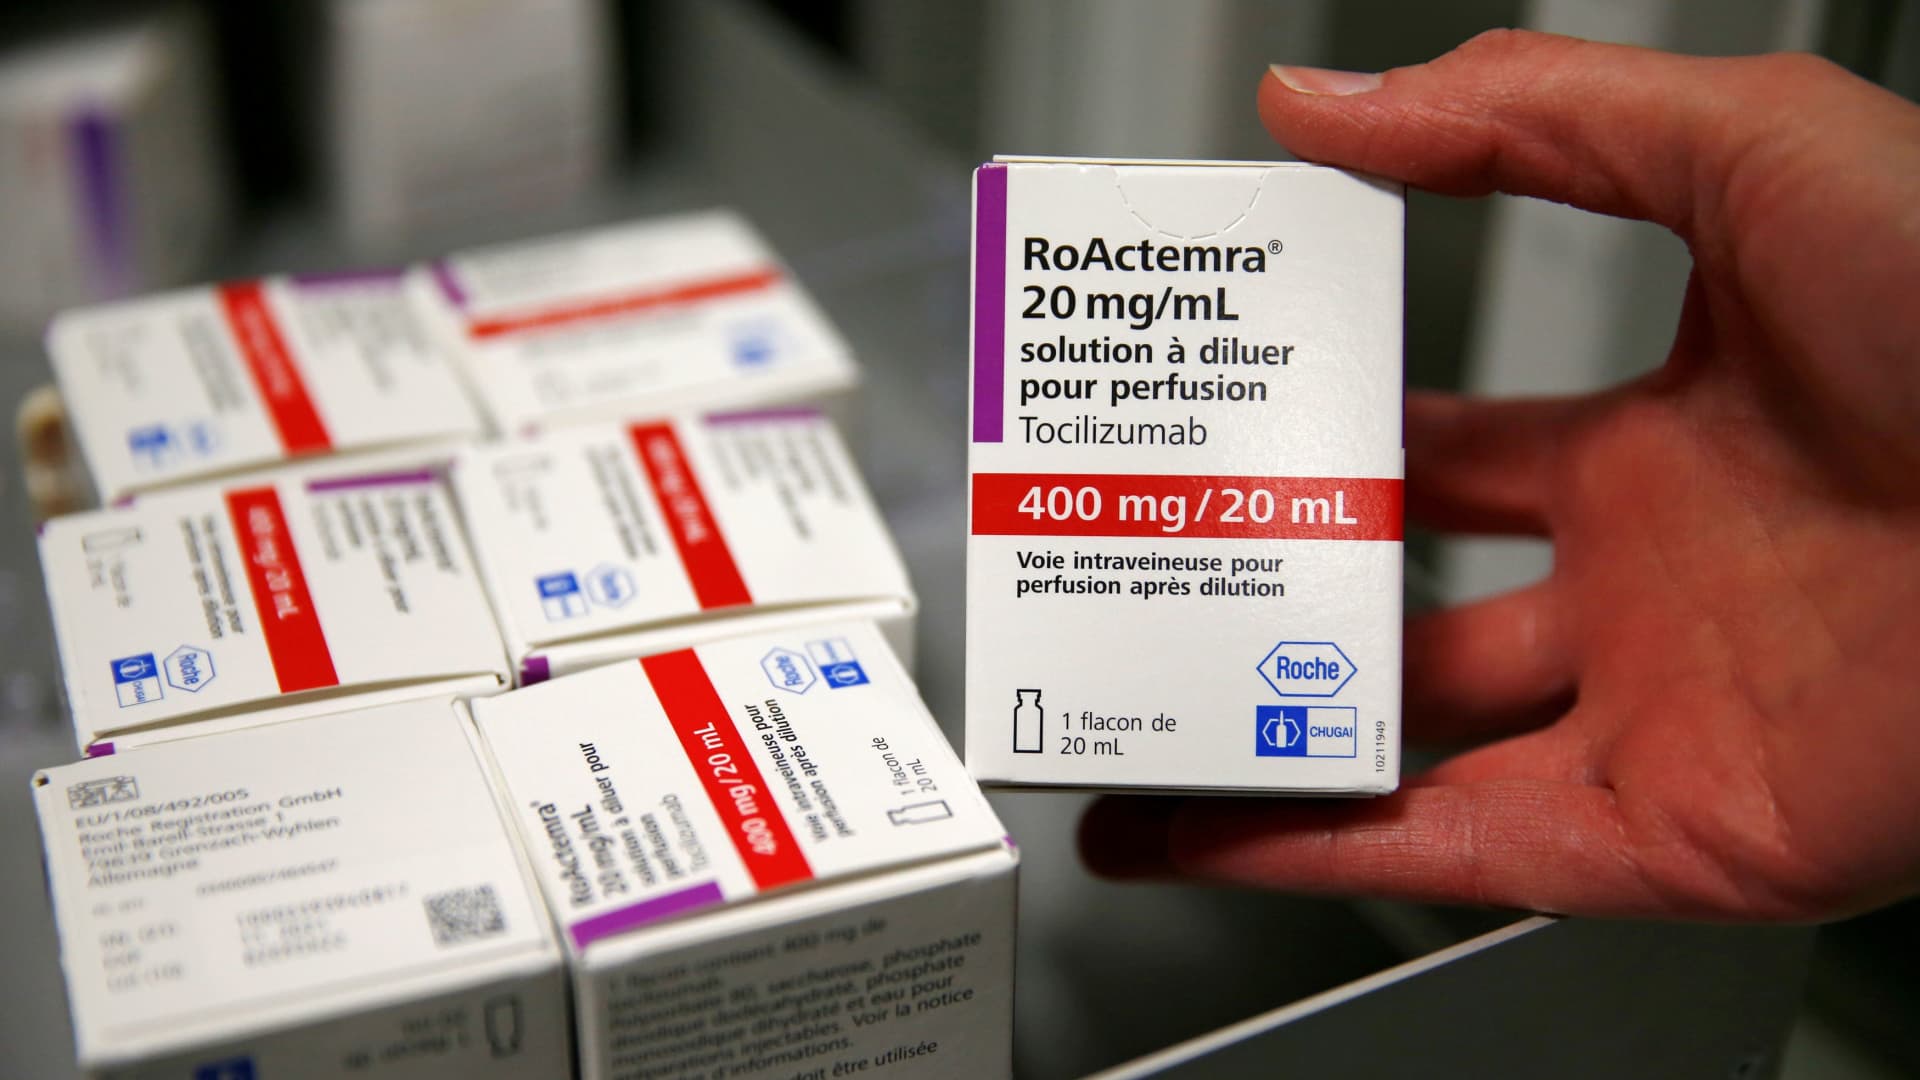 A pharmacist displays a box of tocilizumab, which is used in the treatment of rheumatoid arthritis, at the pharmacy of Cambrai hospital, France, April 28, 2020.